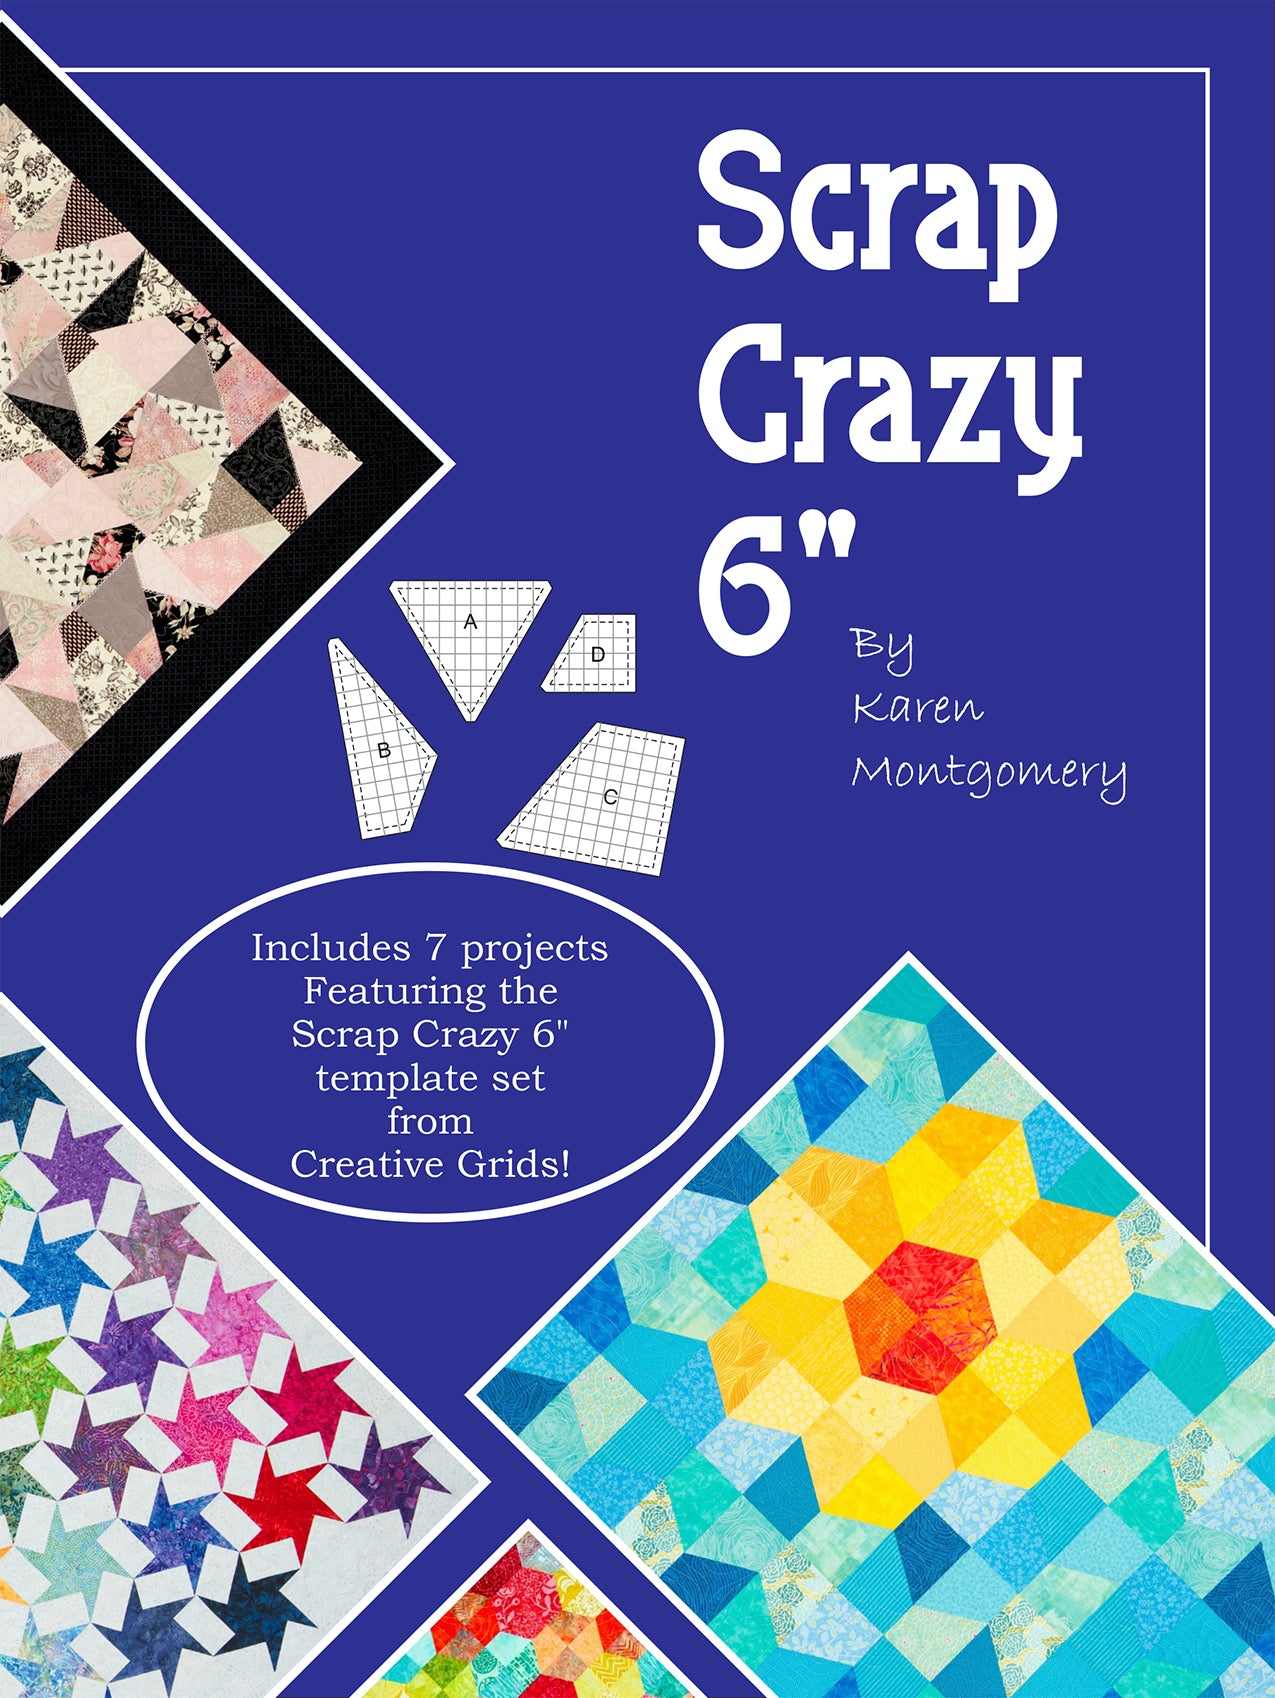 Scrap Crazy 6-Inch Quilt Pattern Book by Karen Montgomery of The Quilt Company